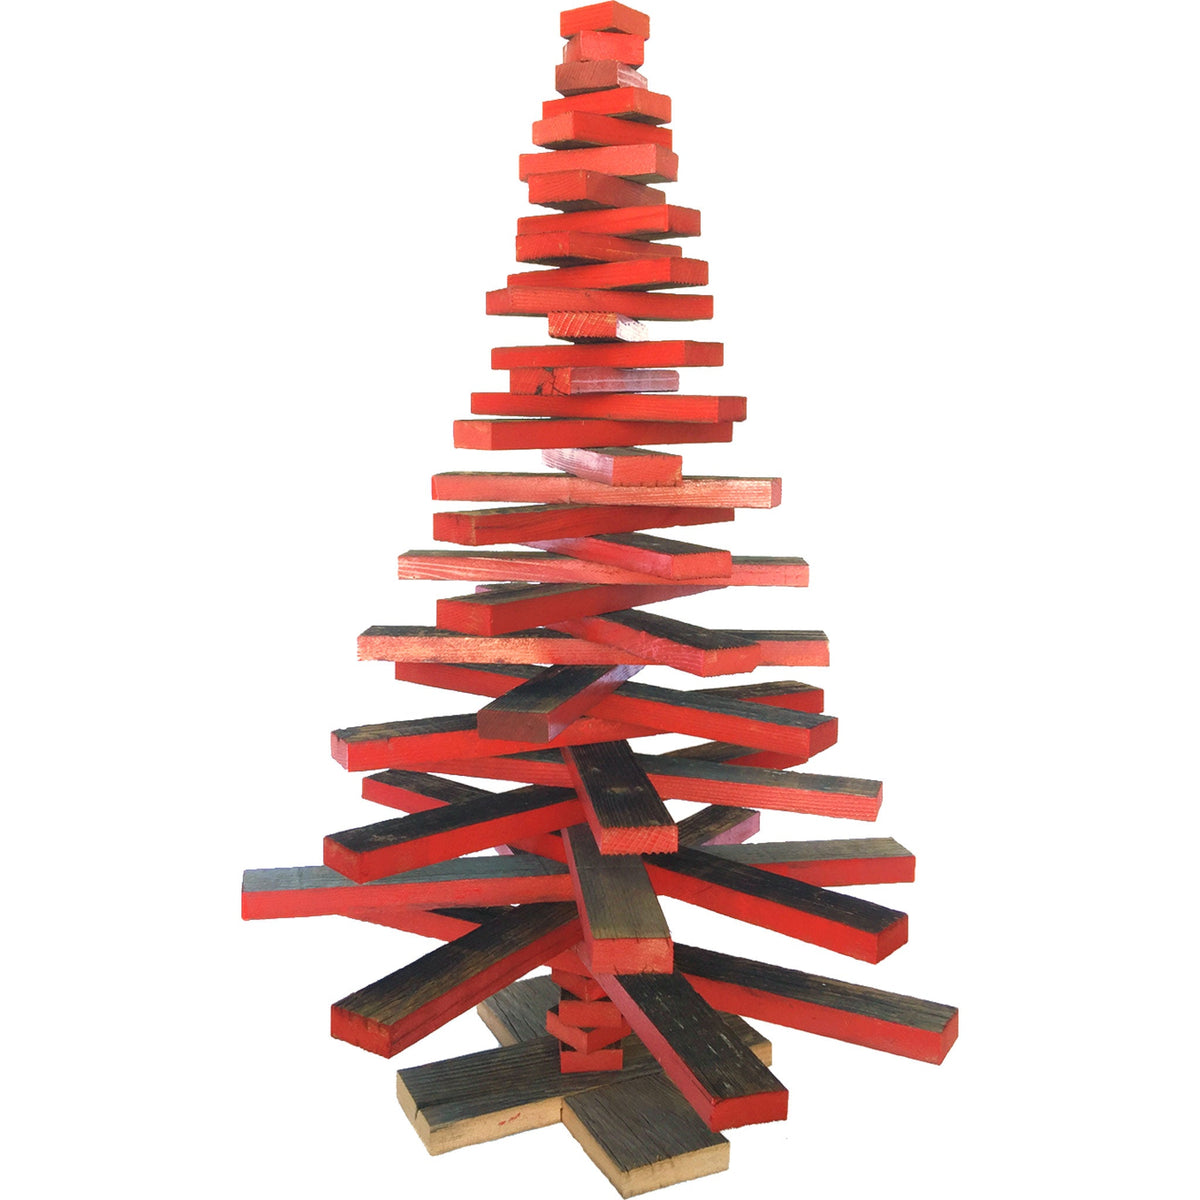 Introducing Lee Display's Redwood Slat Christmas Tree – a stunning piece that harmonizes eco-friendliness with rustic charm.